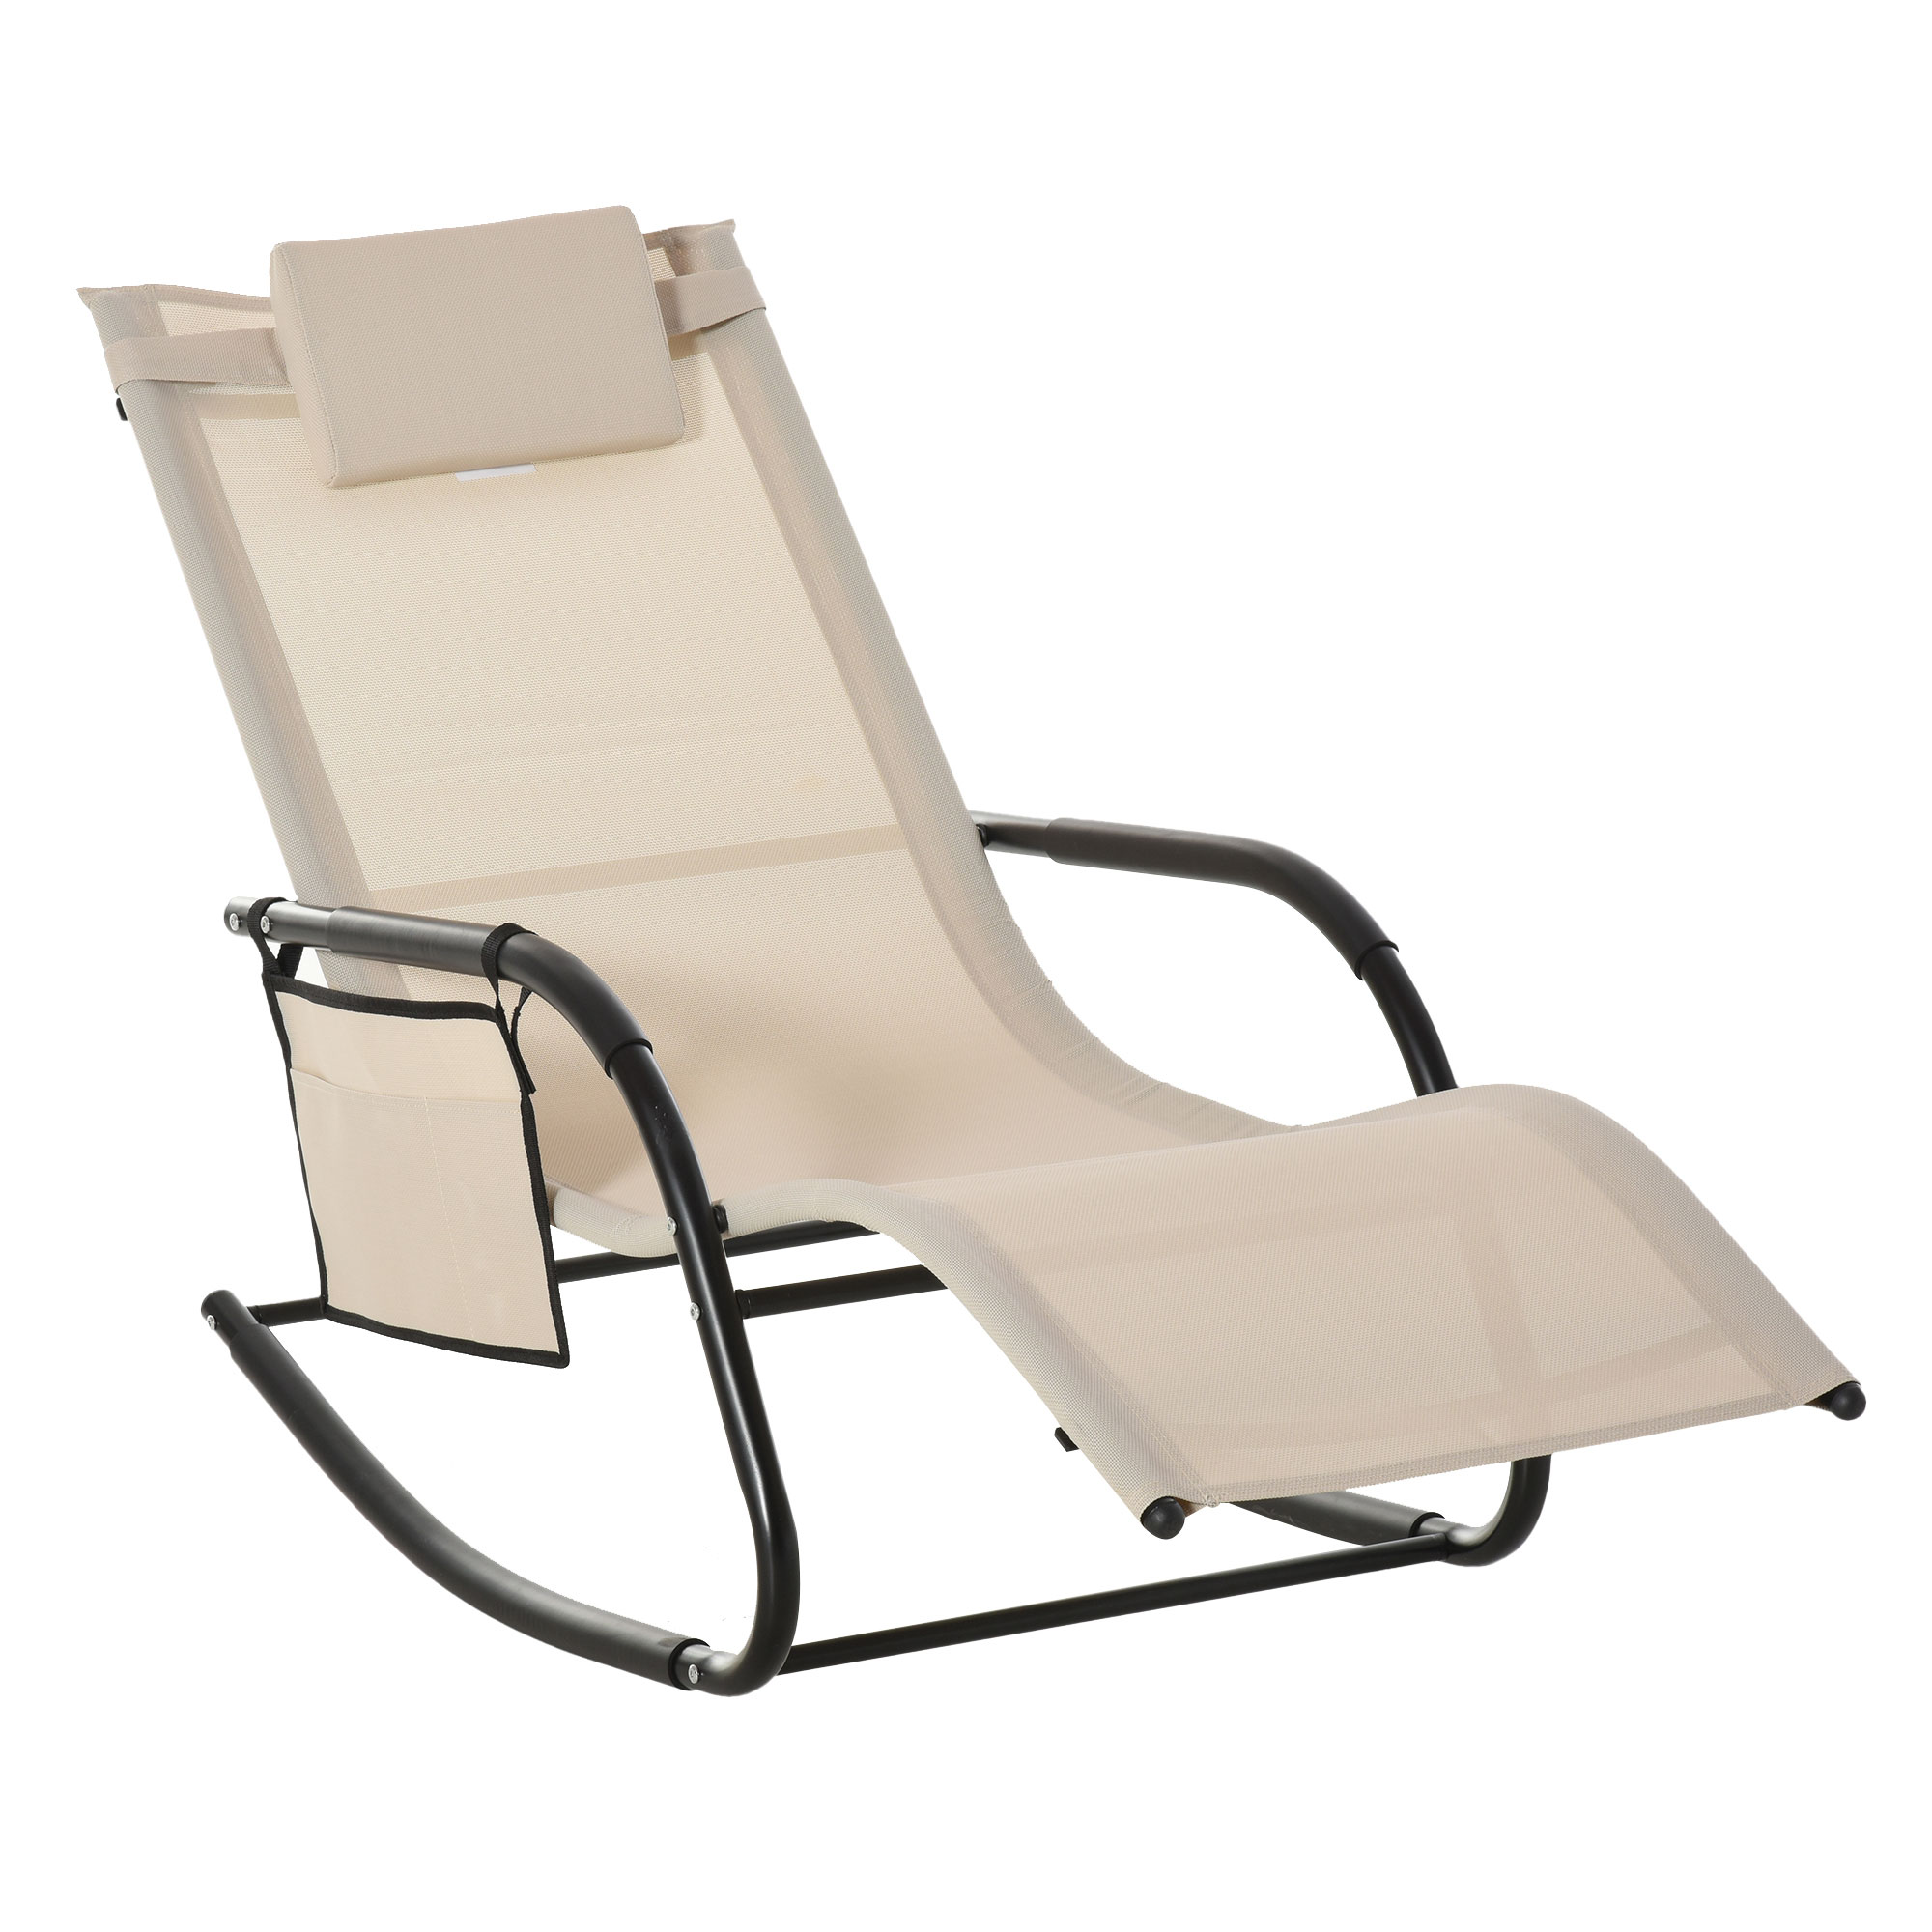 Outsunny Outdoor Rocking Chair, Chaise Lounge Pool Chair for Sun Tanning, Sunbathing, a Rocker with Side Pocket, Armrests & Pillow for Patio, Lawn, Beach, Cream White - image 1 of 9